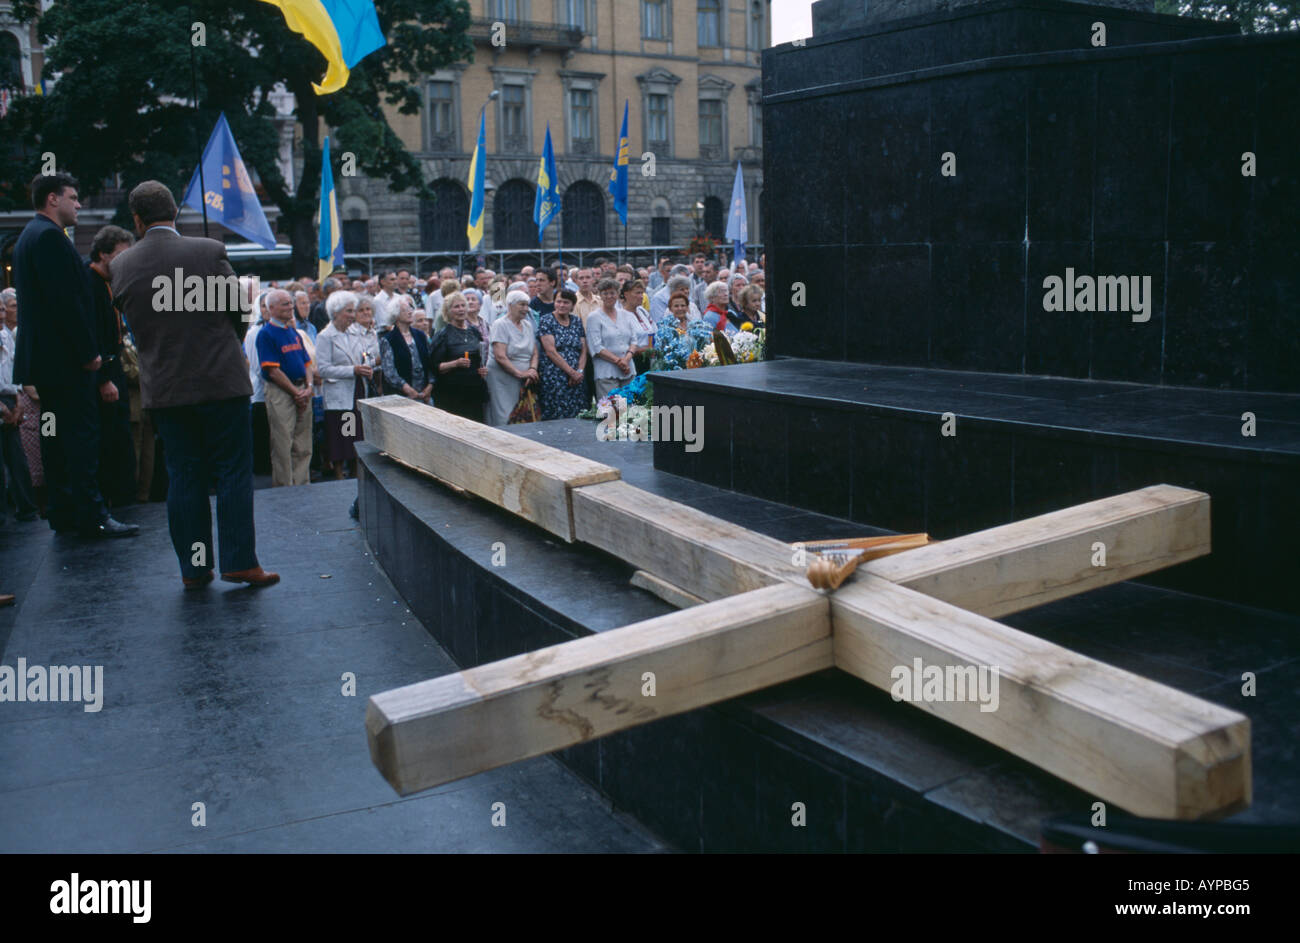 UKRAINE Central Asia Lvov Large wooden cross lays flat in front of crowd dedicated to Gulag victims of Lviv forced labour camp Stock Photo